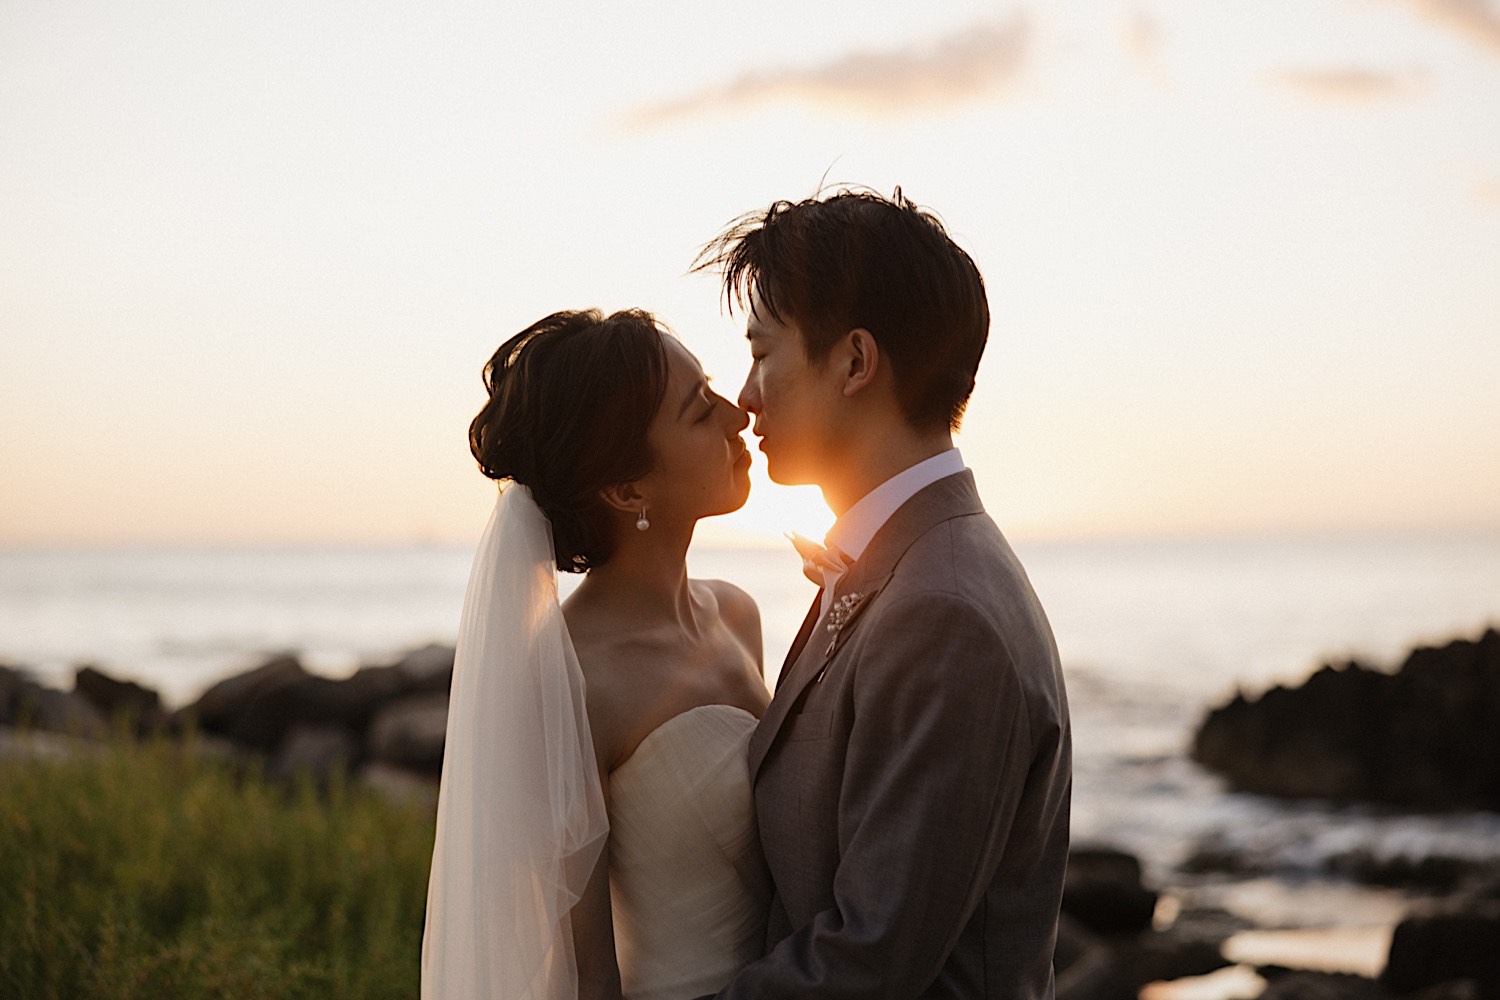 A bride and groom are about to kiss one another, behind them is the ocean and a sun setting directly between them during their elopement in Hawaii